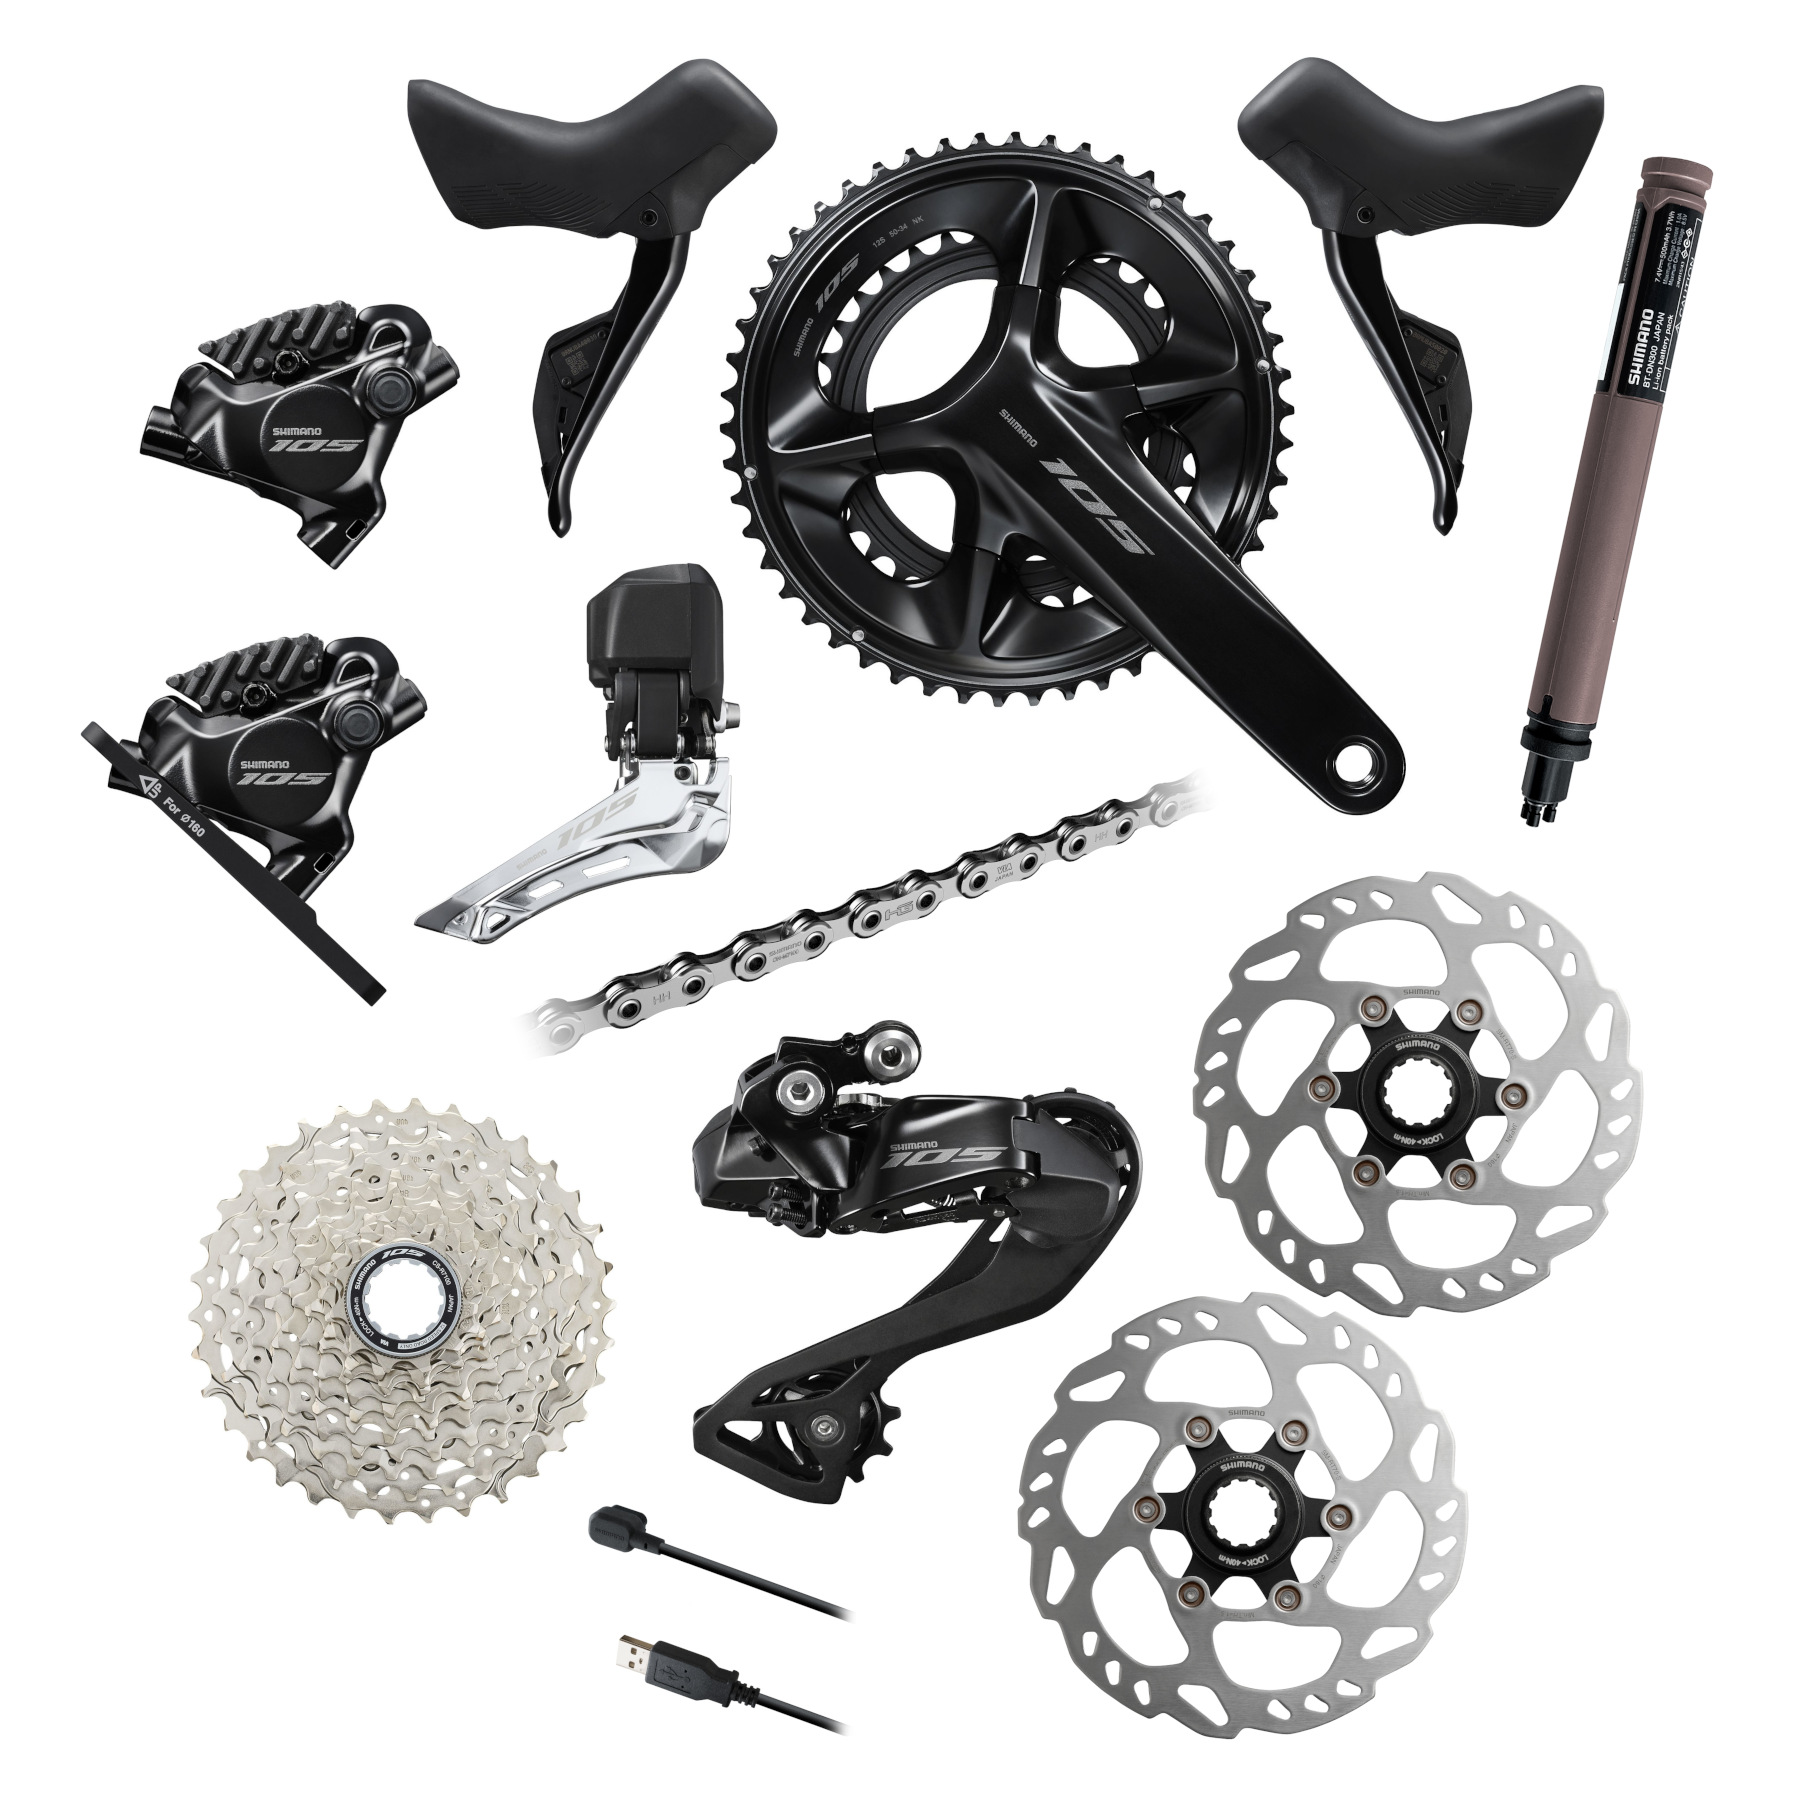 Picture of Shimano 105 R7150 Groupset - Di2 | 2x12-speed - Special Offer